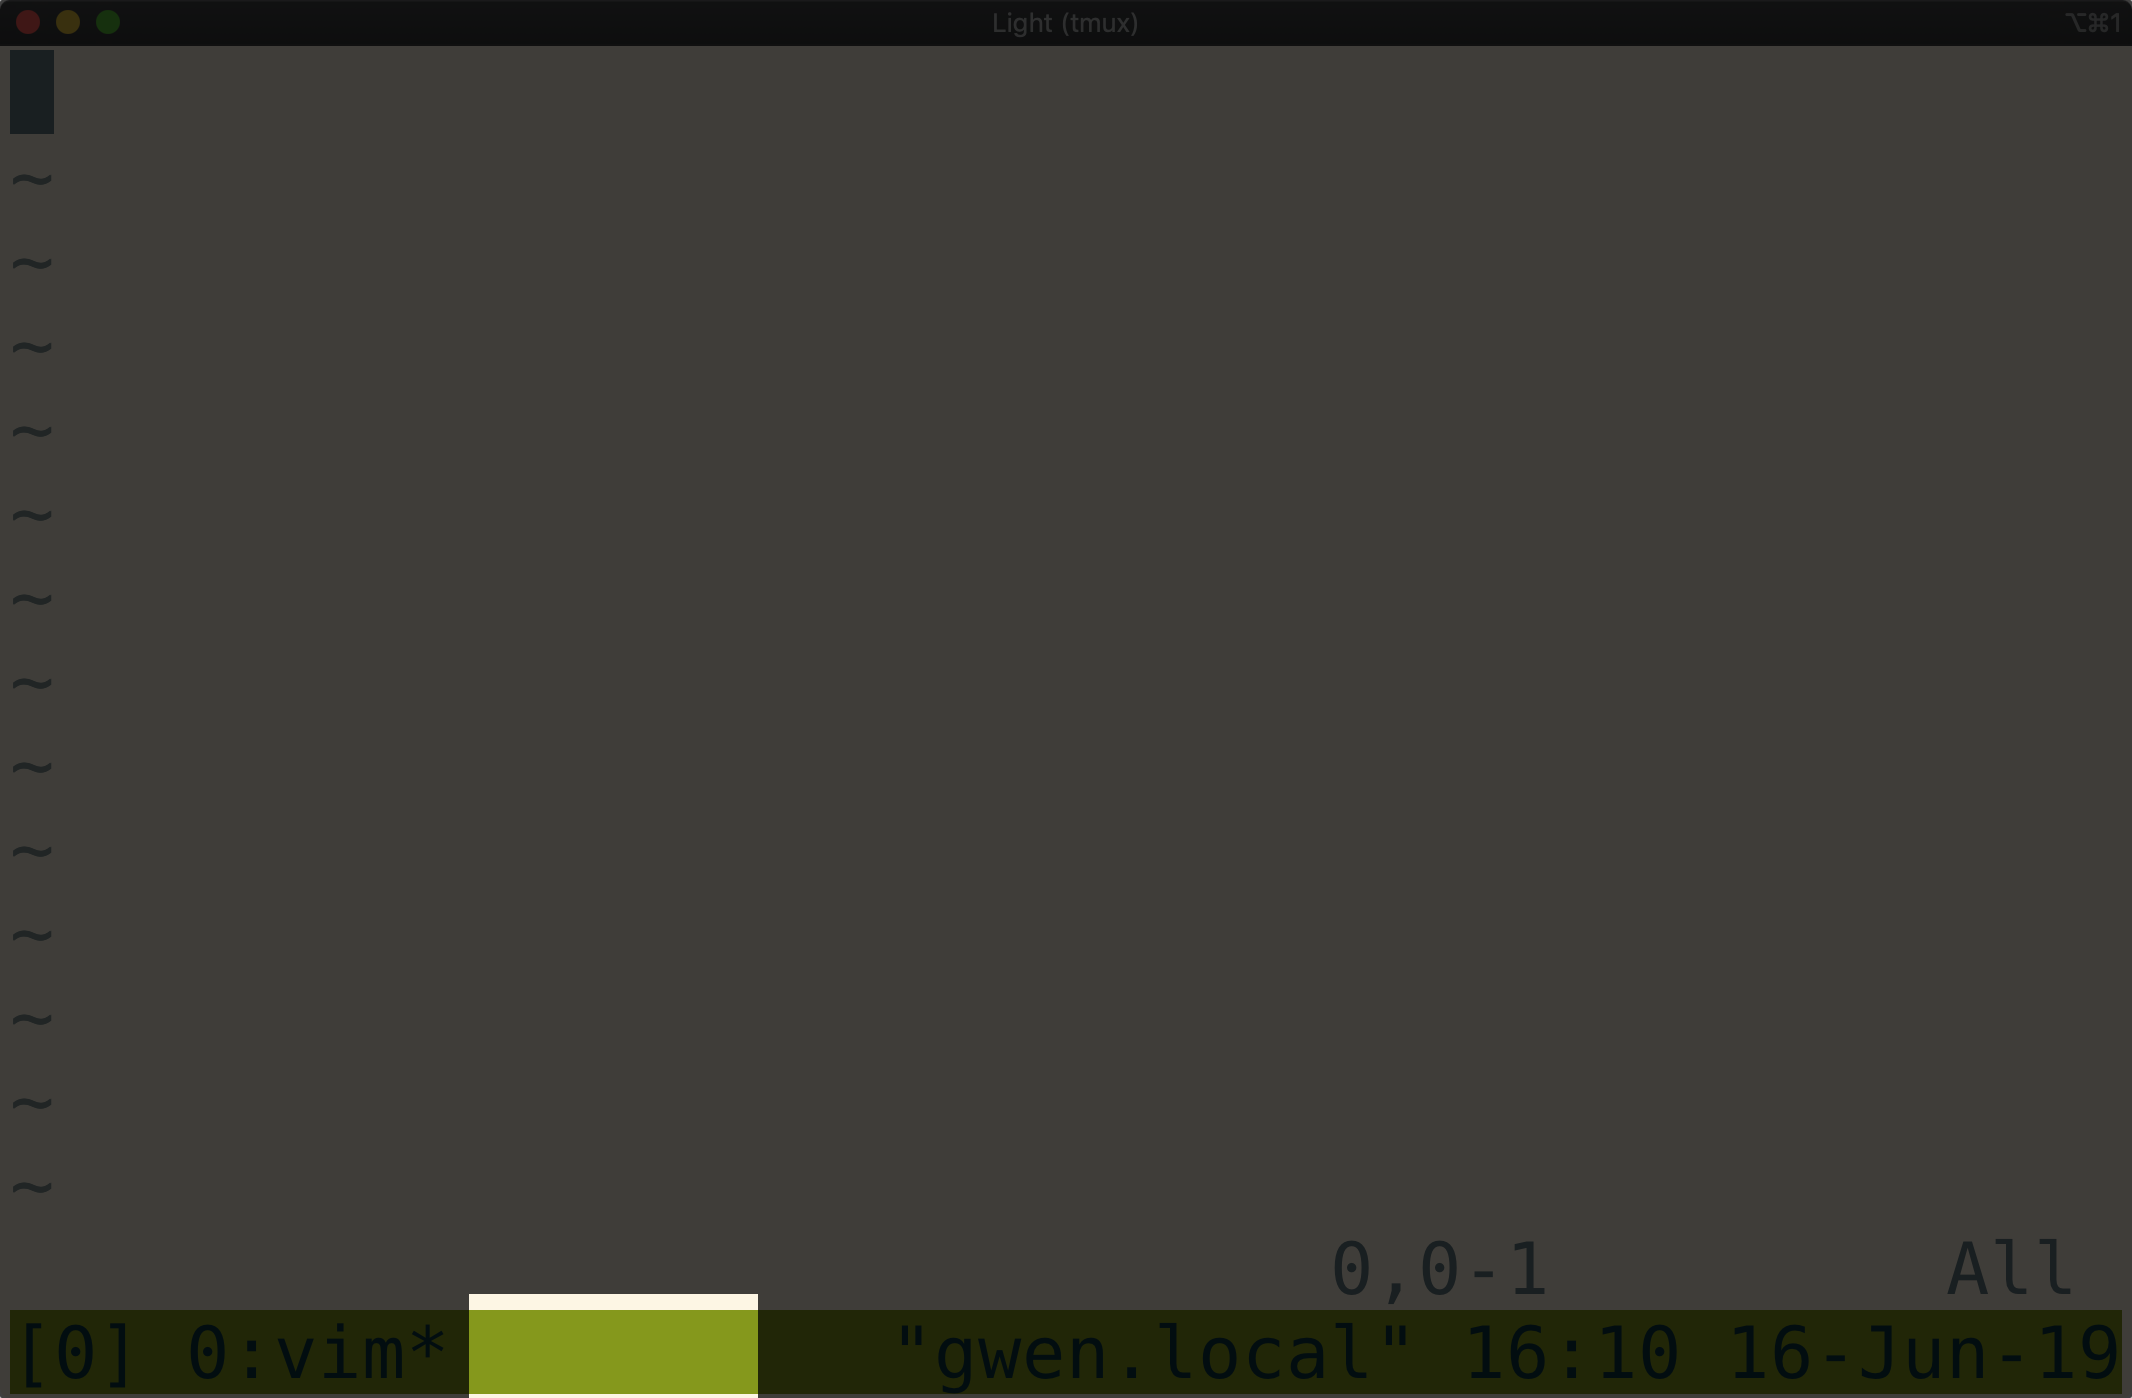 Tmux window highlighting the area of the status bar where the destroyed window was